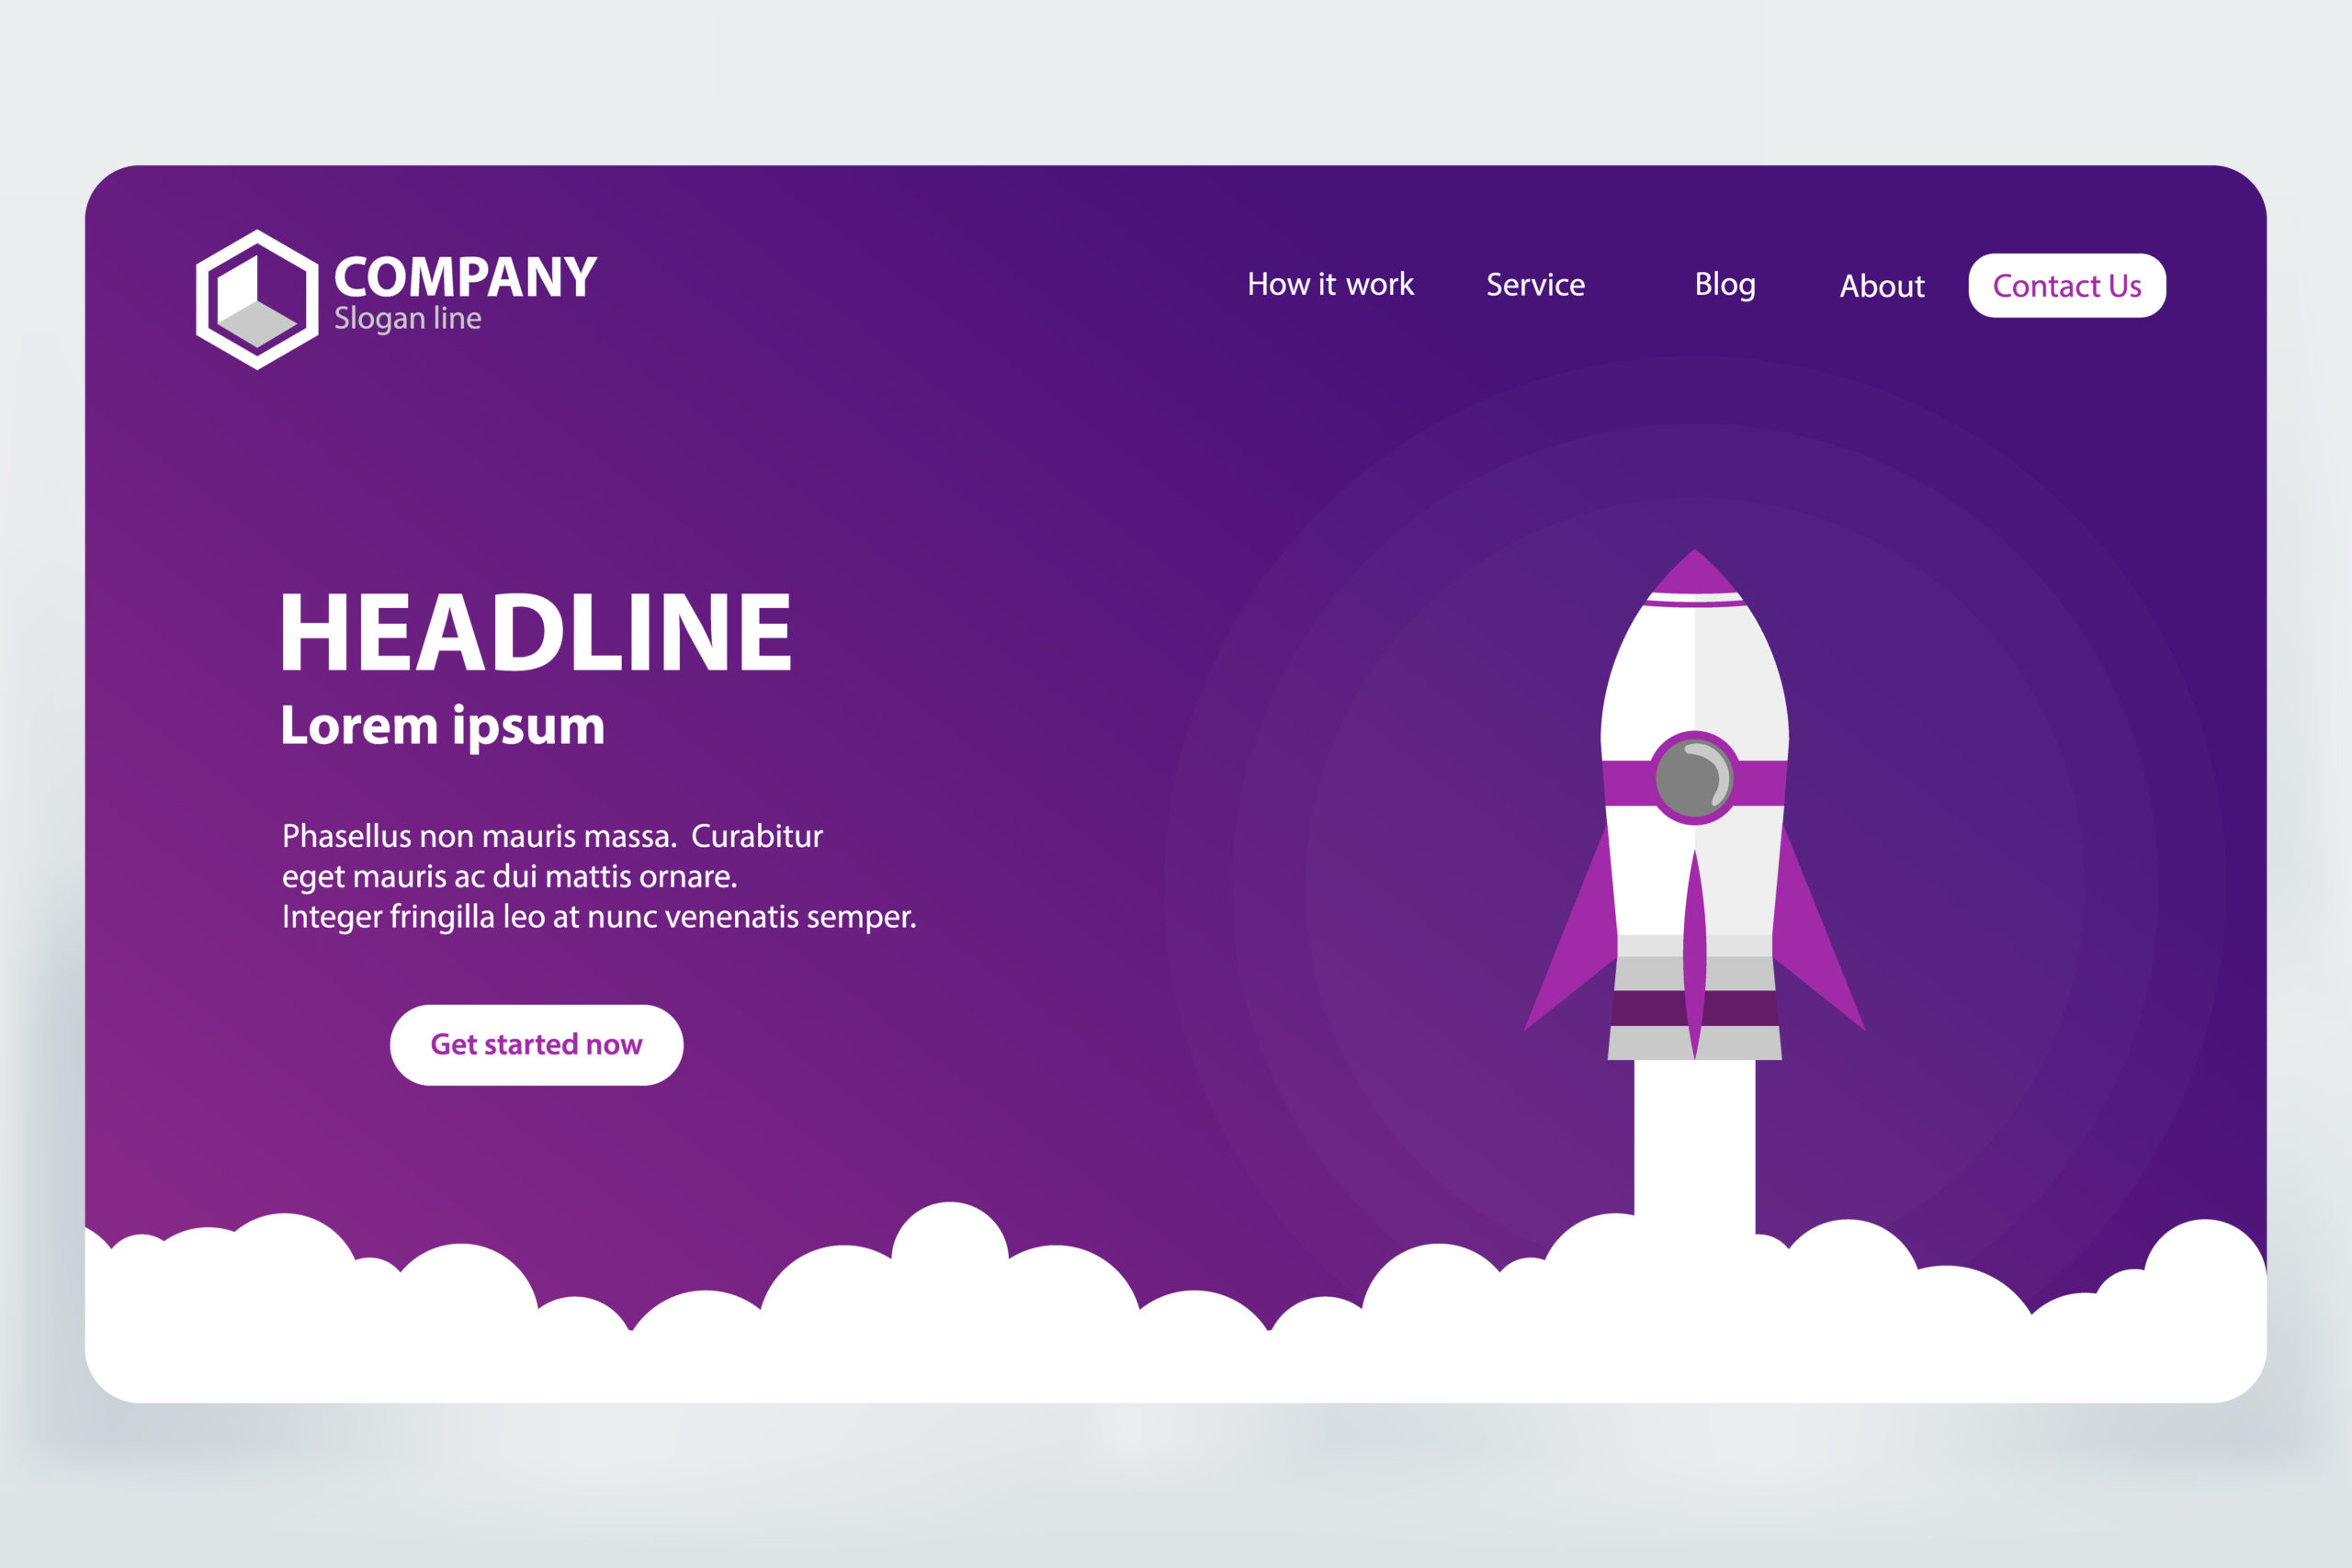 Best HTML5 Bootstrap 5 WordPress Themes For Startup SaaS Websites, Magazines and Blogs 2021